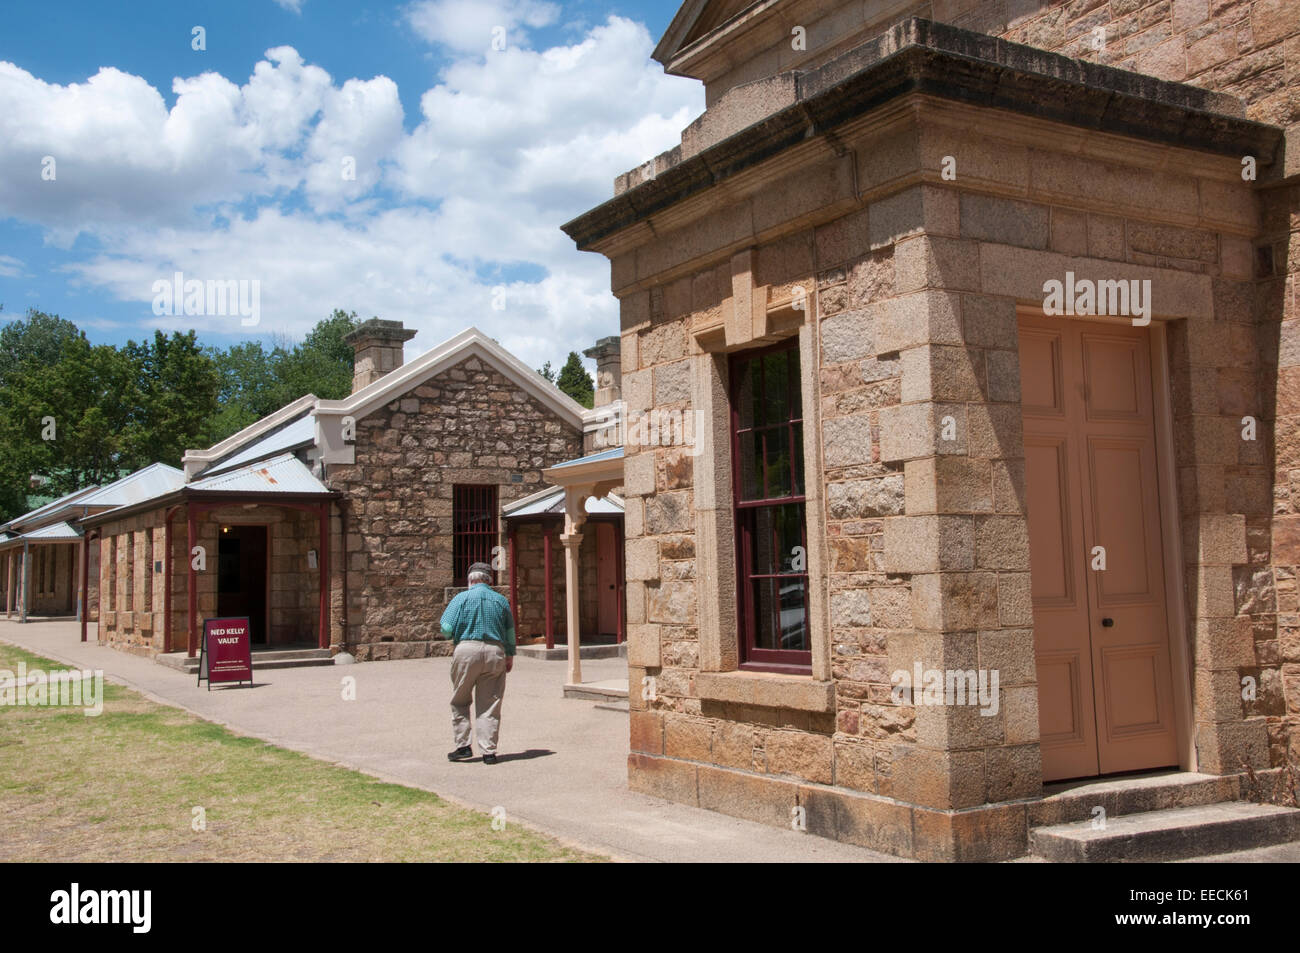 Colonial-era courthouse and other public buildings in Beechworth, NE Victoria, Australia Stock Photo